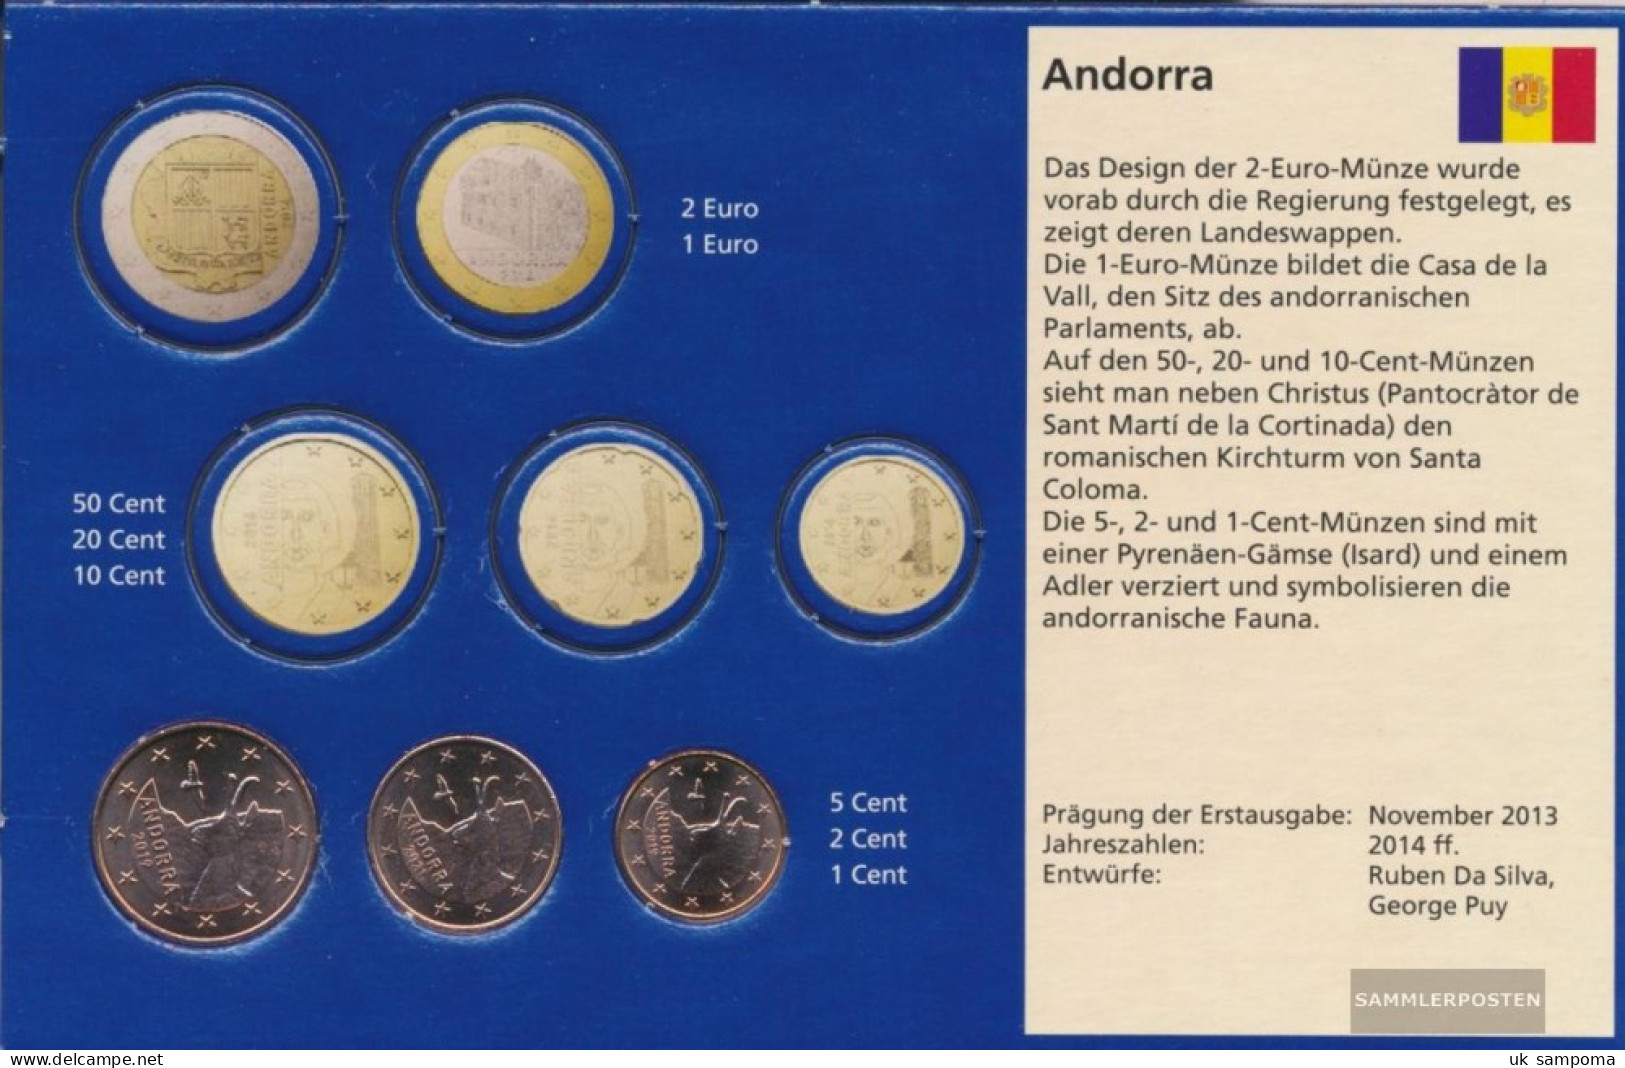 Andorra AND1- 3 Stgl./unzirkuliert Mixed Vintages Stgl./unzirkuliert From 2014 Kursmünzen 1, 2 And 5 CENT - Andorra